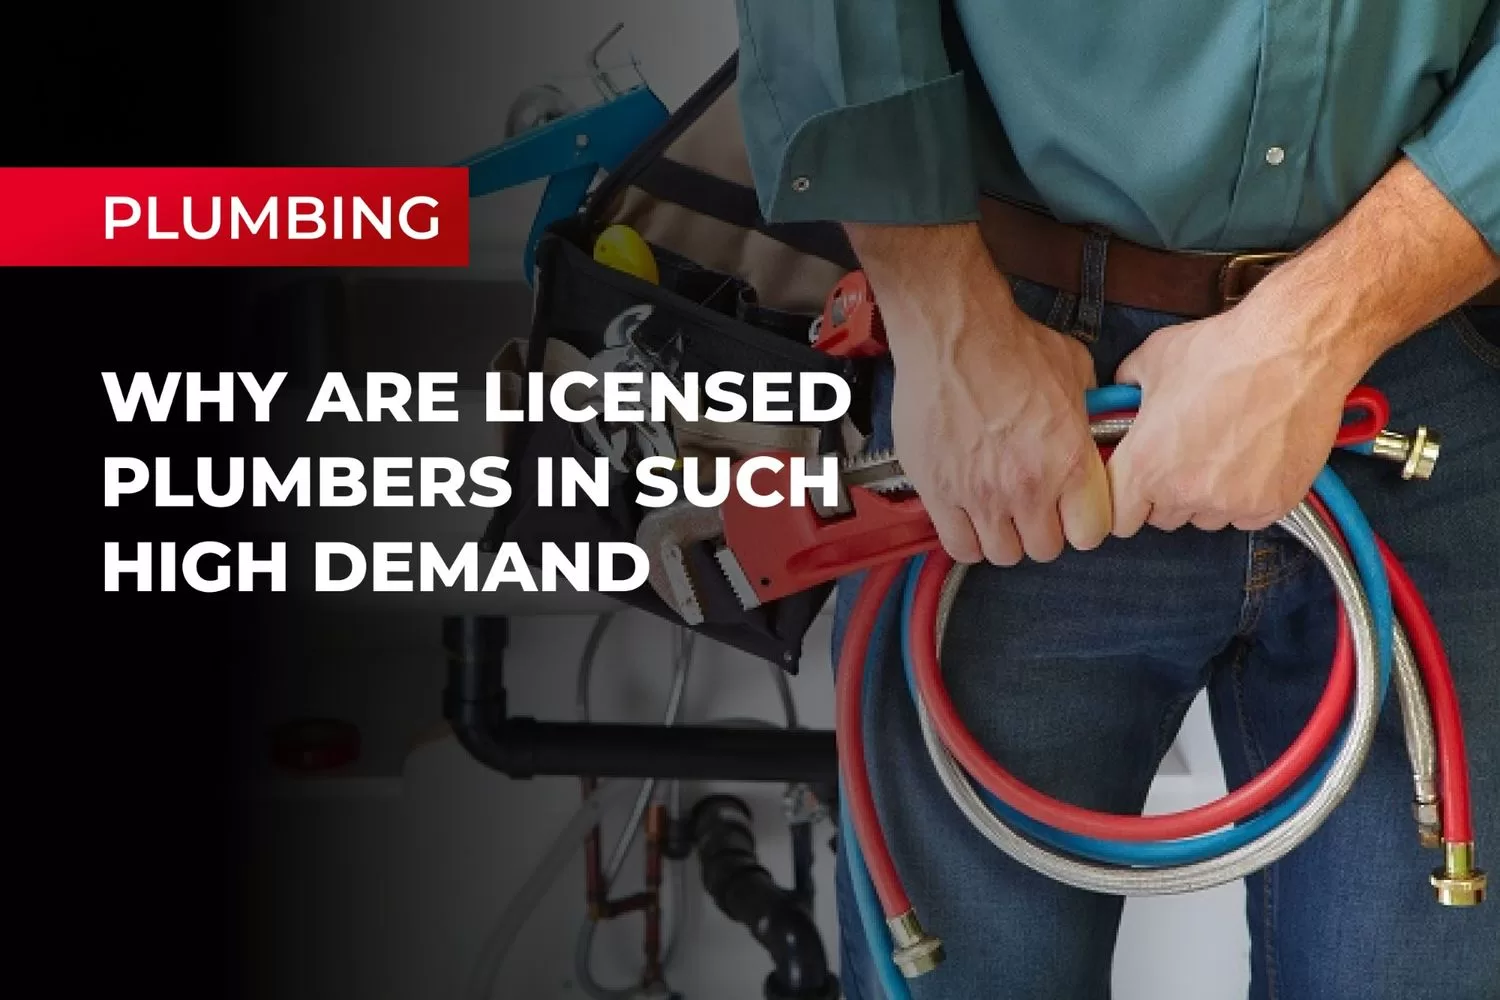 Why are Licensed Plumbers in Such High Demand?